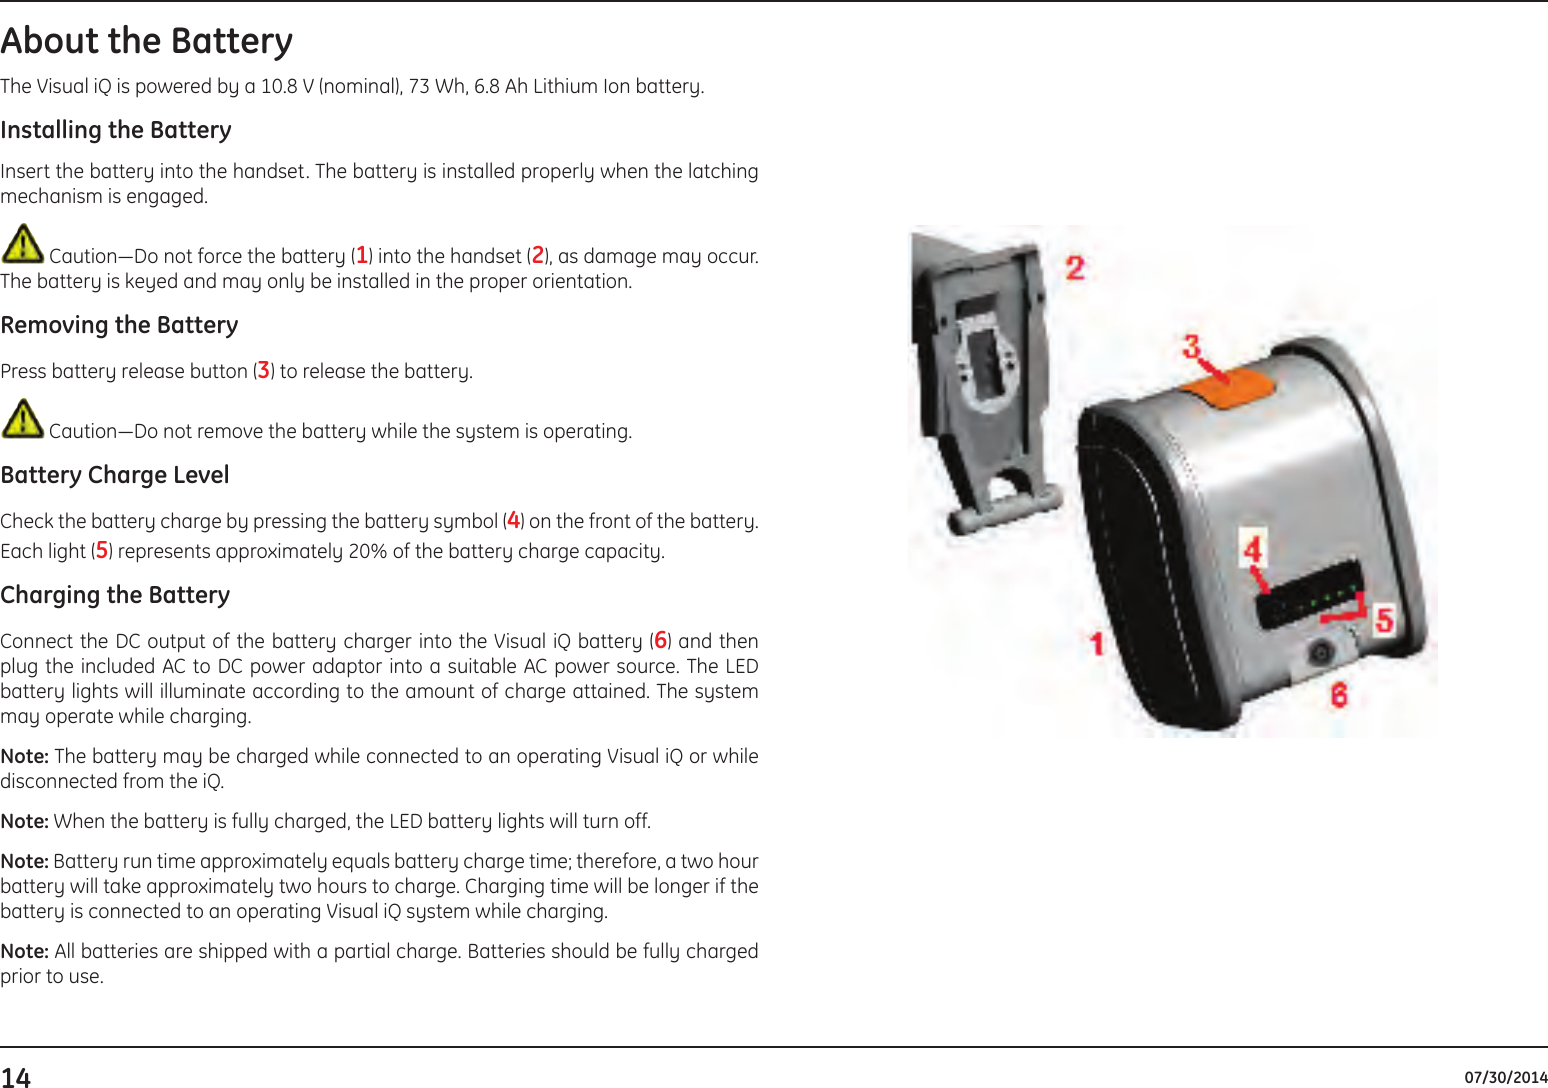 14 07/30/2014About the BatteryThe Visual iQ is powered by a 10.8 V (nominal), 73 Wh, 6.8 Ah Lithium Ion battery.Installing the BatteryInsert the battery into the handset. The battery is installed properly when the latching mechanism is engaged. Caution—Do not force the battery (1) into the handset (2), as damage may occur. The battery is keyed and may only be installed in the proper orientation.Removing the BatteryPress battery release button (3) to release the battery.  Caution—Do not remove the battery while the system is operating.Battery Charge LevelCheck the battery charge by pressing the battery symbol (4) on the front of the battery. Each light (5) represents approximately 20% of the battery charge capacity.Charging the BatteryConnect the DC output of the battery charger into the Visual iQ battery (6) and then plug the included AC to DC power adaptor into a suitable AC power source. The LED battery lights will illuminate according to the amount of charge attained. The system may operate while charging.Note: The battery may be charged while connected to an operating Visual iQ or while disconnected from the iQ. Note: When the battery is fully charged, the LED battery lights will turn off.Note: Battery run time approximately equals battery charge time; therefore, a two hour battery will take approximately two hours to charge. Charging time will be longer if the battery is connected to an operating Visual iQ system while charging. Note: All batteries are shipped with a partial charge. Batteries should be fully charged prior to use. 